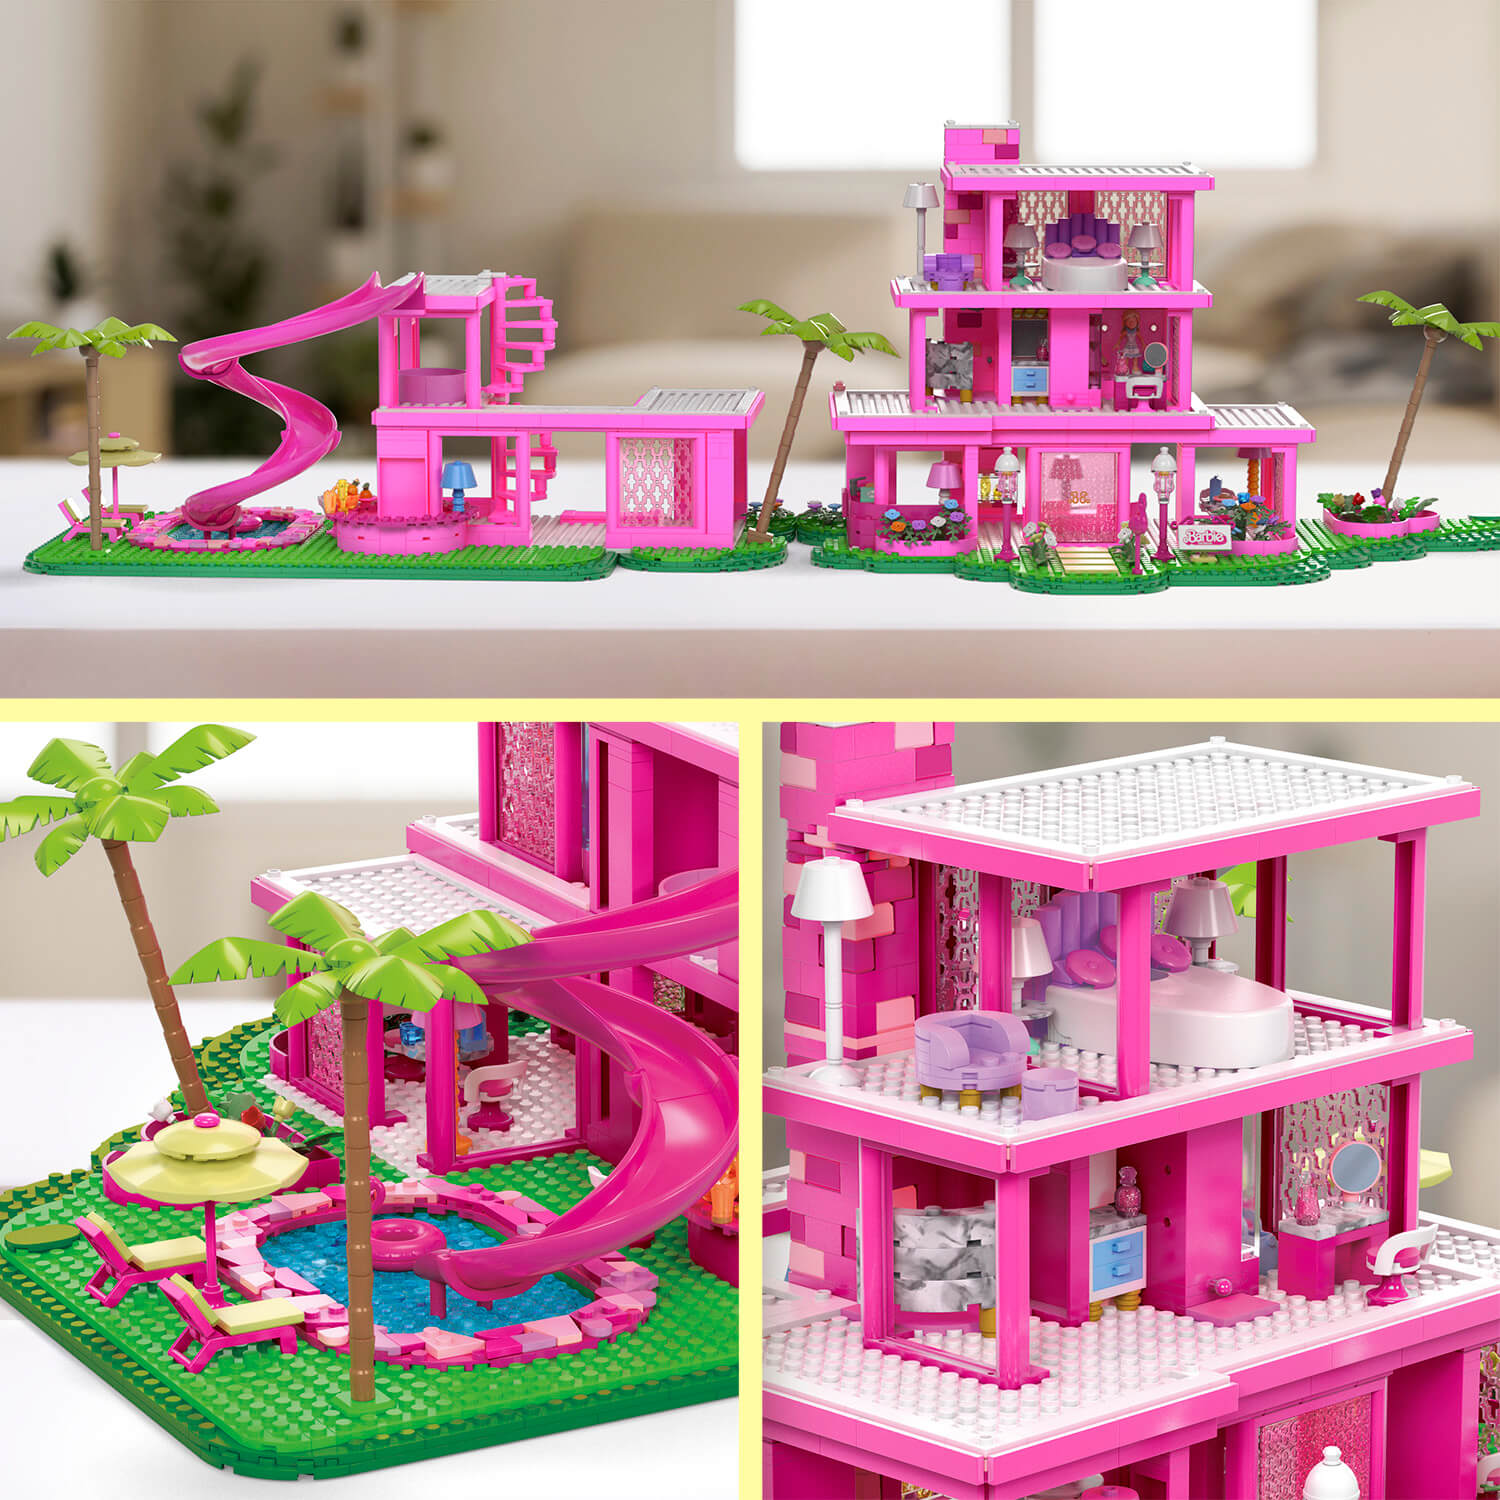 MEGA Barbie dreamhouse feature views shows it folded open, the upper floors, and the pool and slide area.